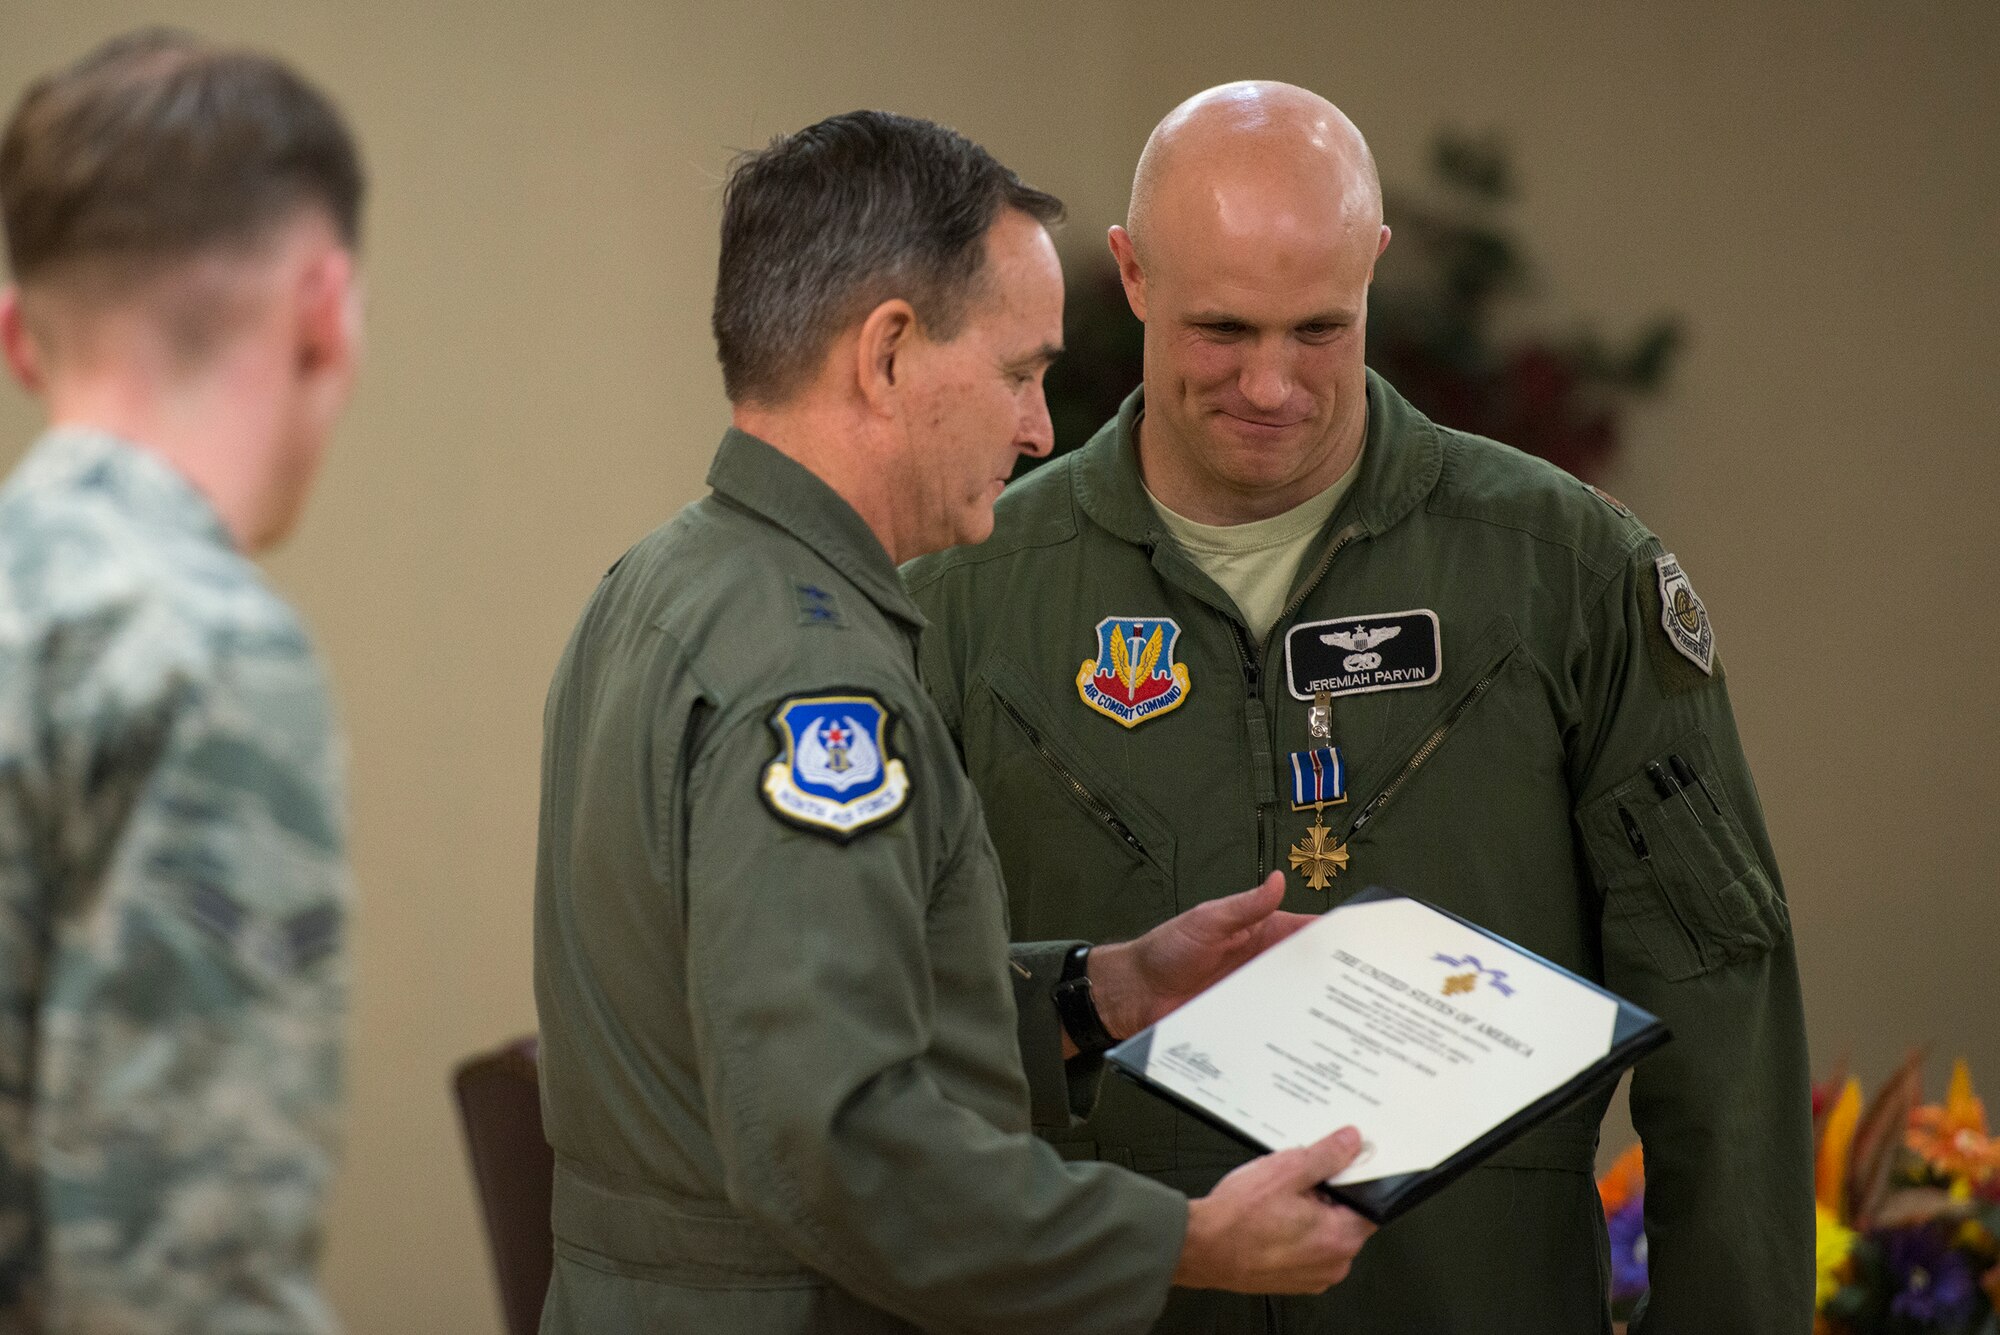 U.S. Air Force Maj. Jeremiah Parvin, 75th Fighter Squadron A-10C Thunderbolt II pilot, smiles as Maj. Gen H.D. Polumbo Jr., Ninth Air Force commander, presents a certificate during a Distinguished Flying Cross presentation ceremony Jan. 29, 2015, at Moody Air Force Base, Ga. Parvin earned the Distinguished Flying Cross with Valor for his actions in Afghanistan in 2008 and is credited with saving the lives of six Marines. (U.S. Air Force photo by Senior Airman Ryan Callaghan/Released)